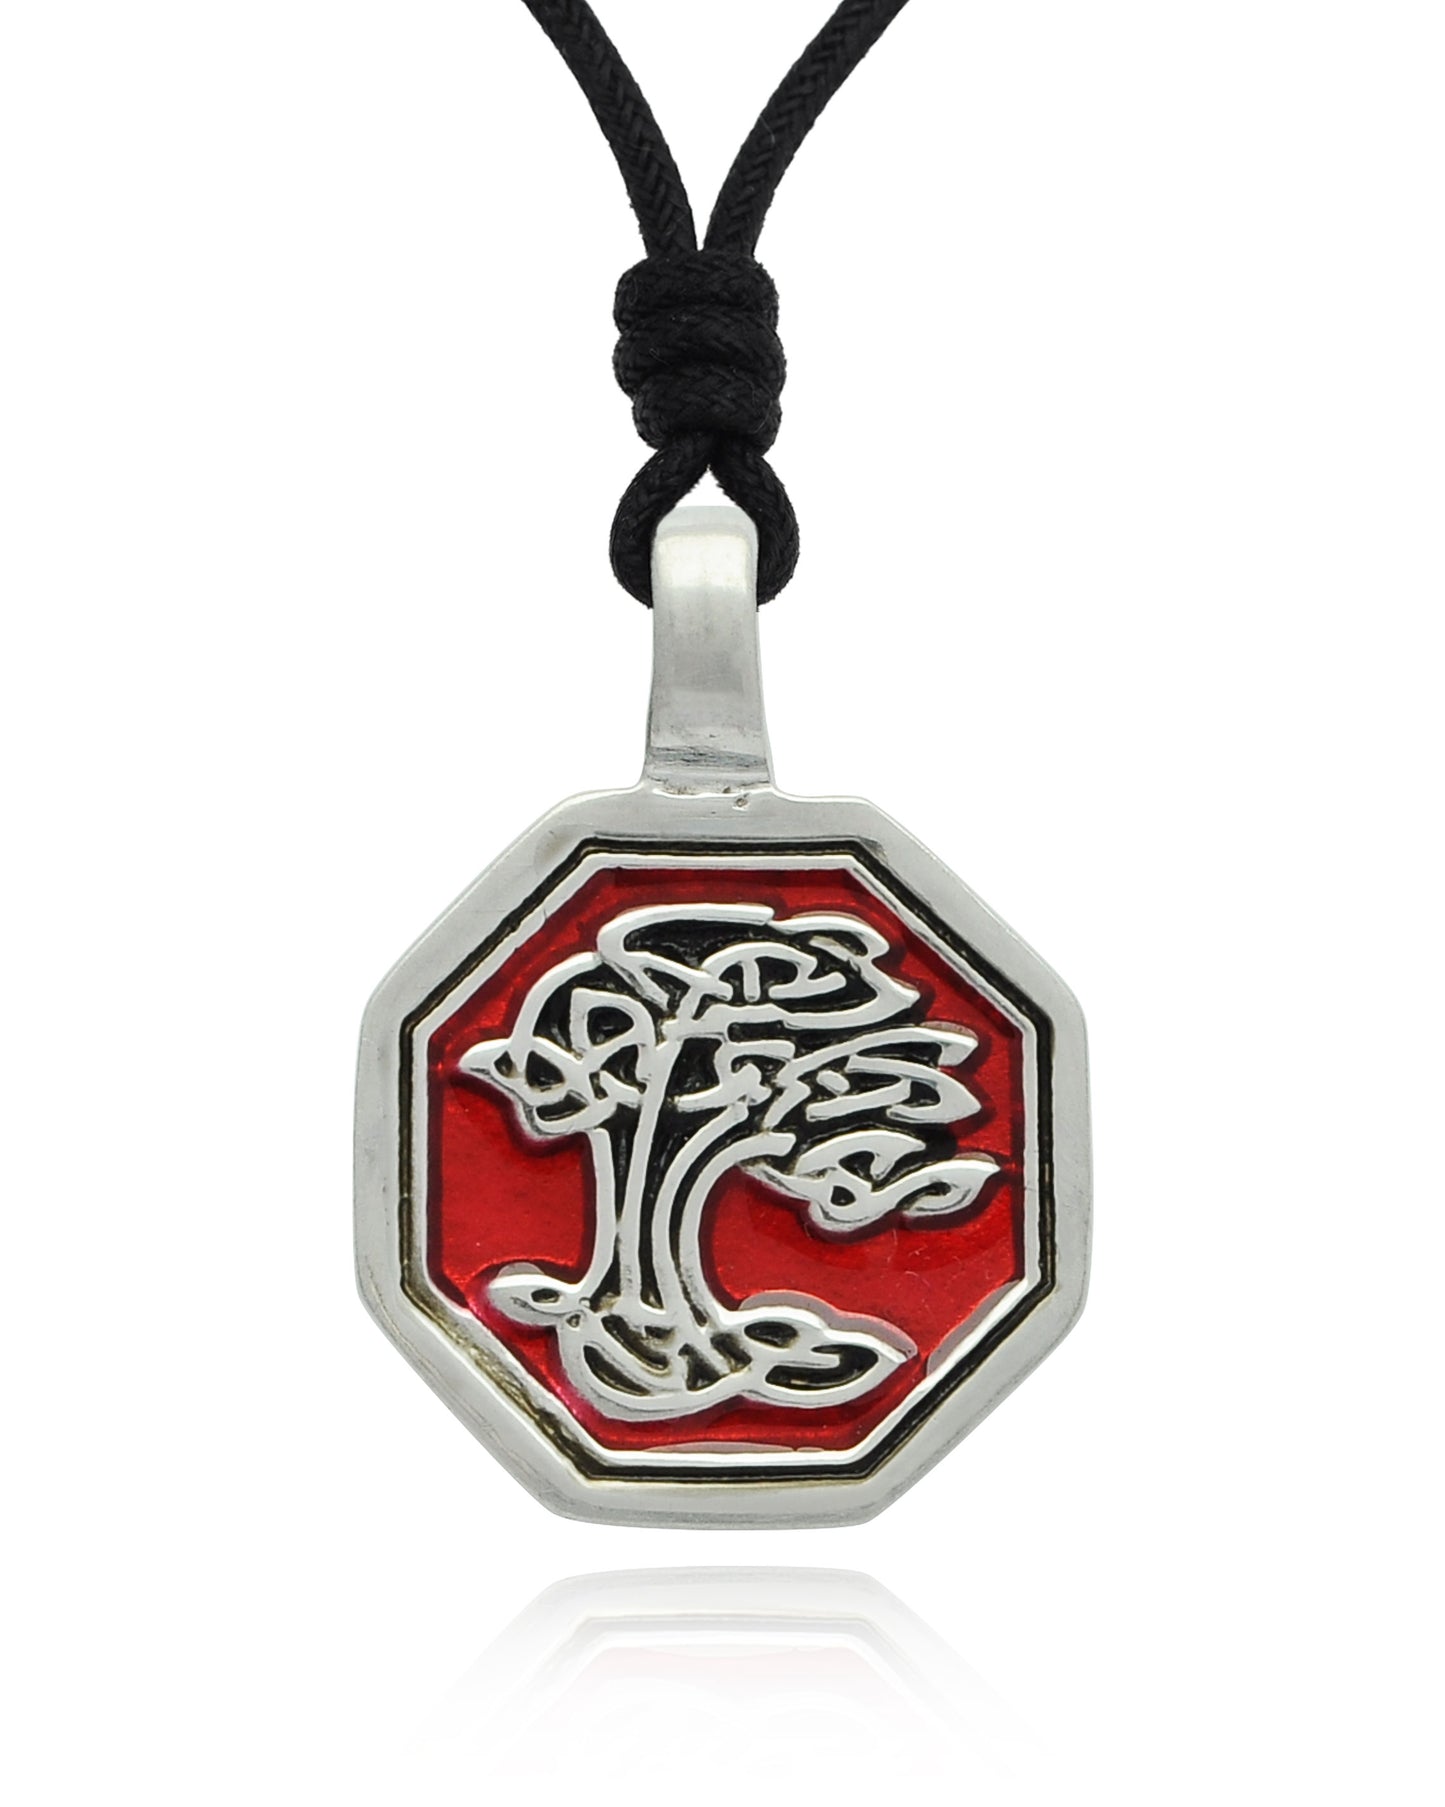 New Celtic Tree Silver Pewter Charm Necklace Pendant Jewelry